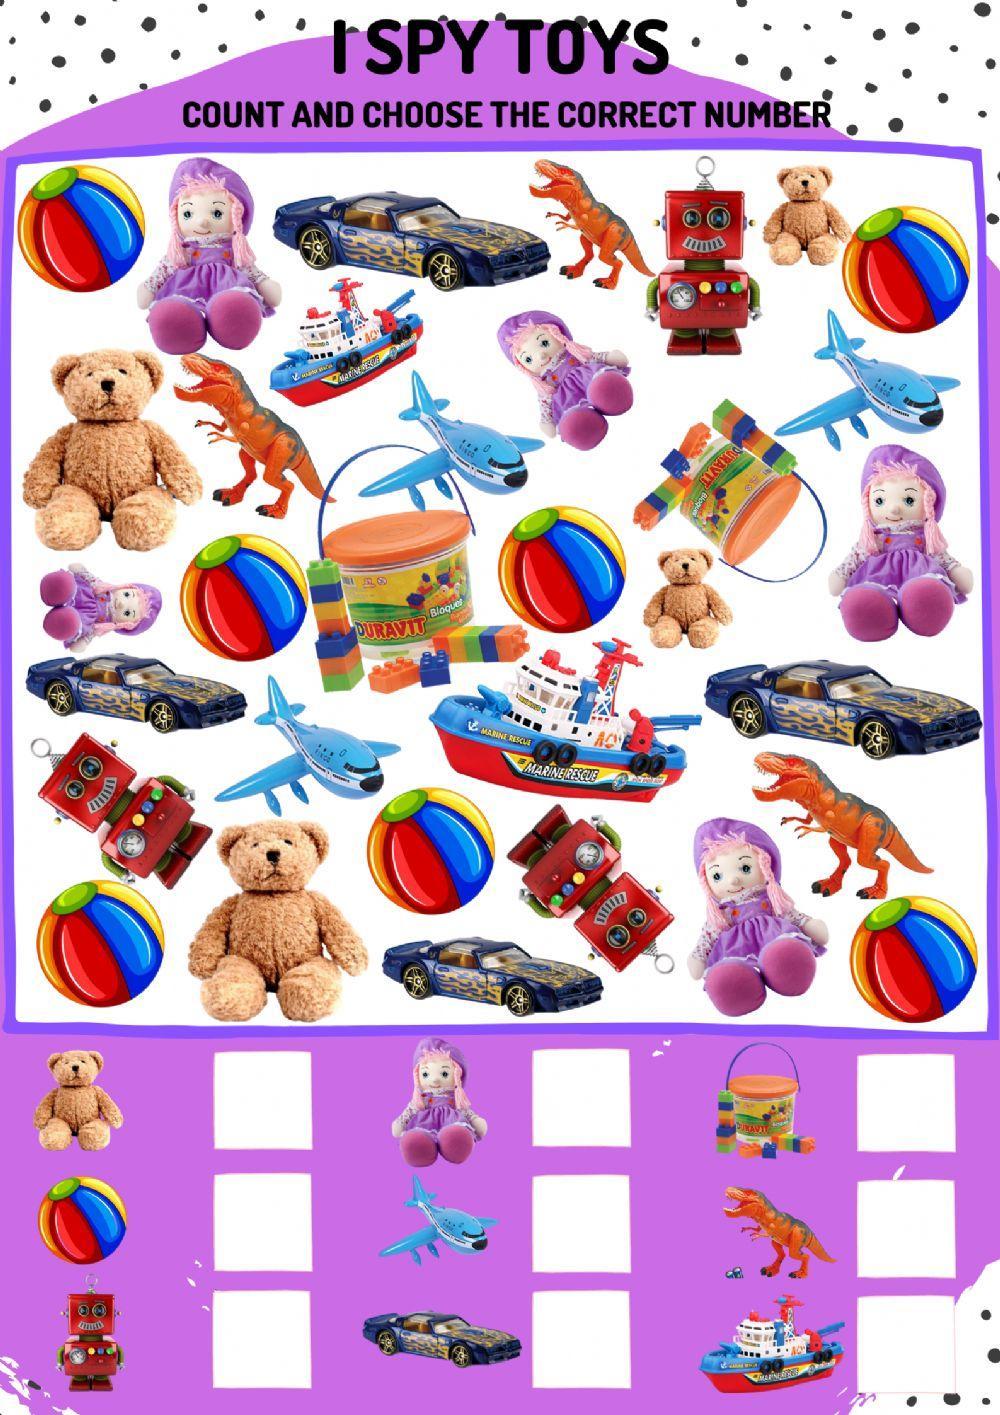 I spy toys: count and choose the correct number